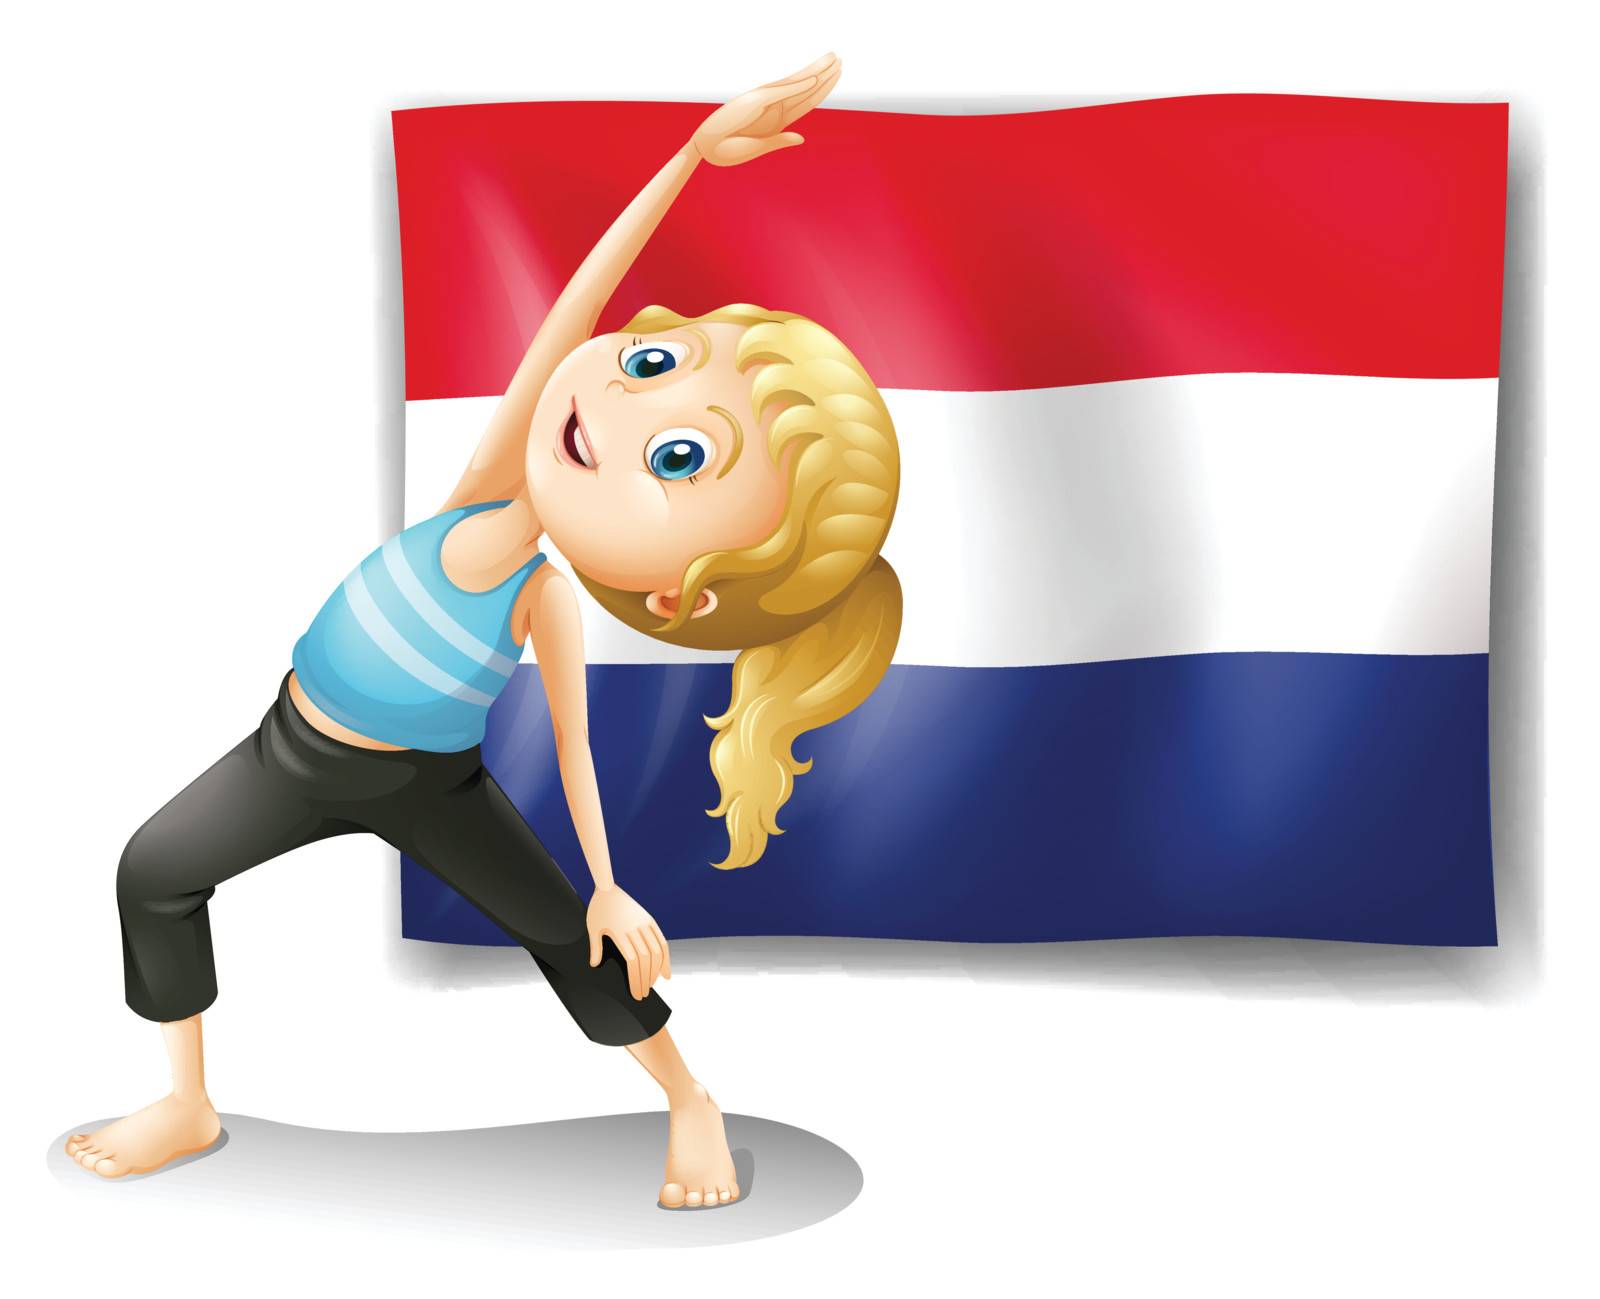 Illustration of a girl in front of the flag of Netherlands on a white background